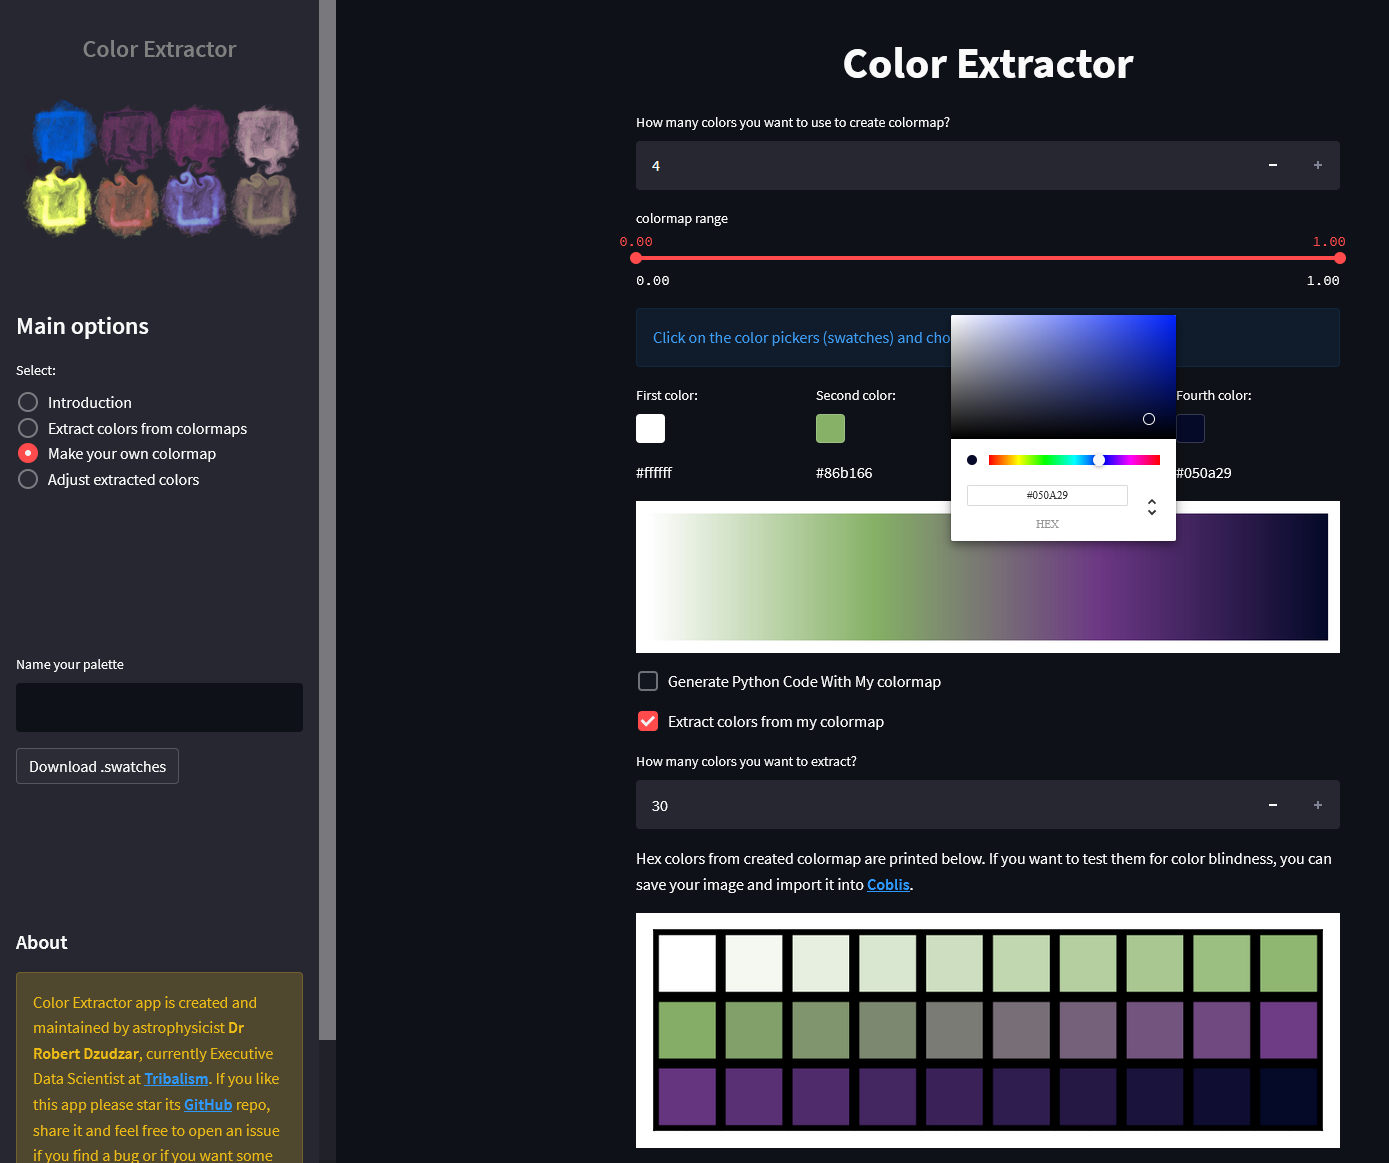 Create your own colormap